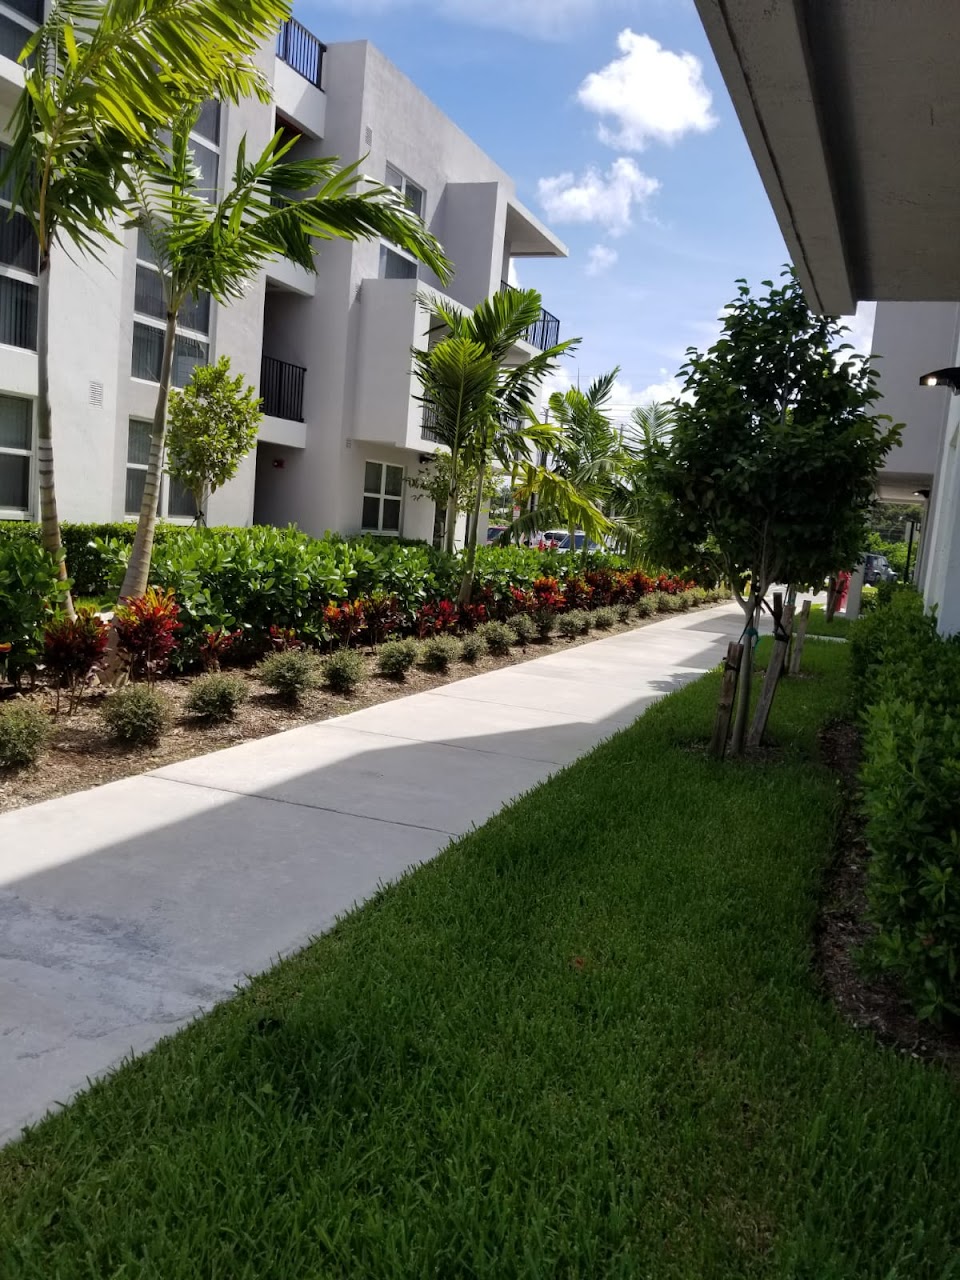 Photo of PRINCETON PARK. Affordable housing located at SW 248TH ST AND SW 133RD AVE HOMESTEAD, FL 33032